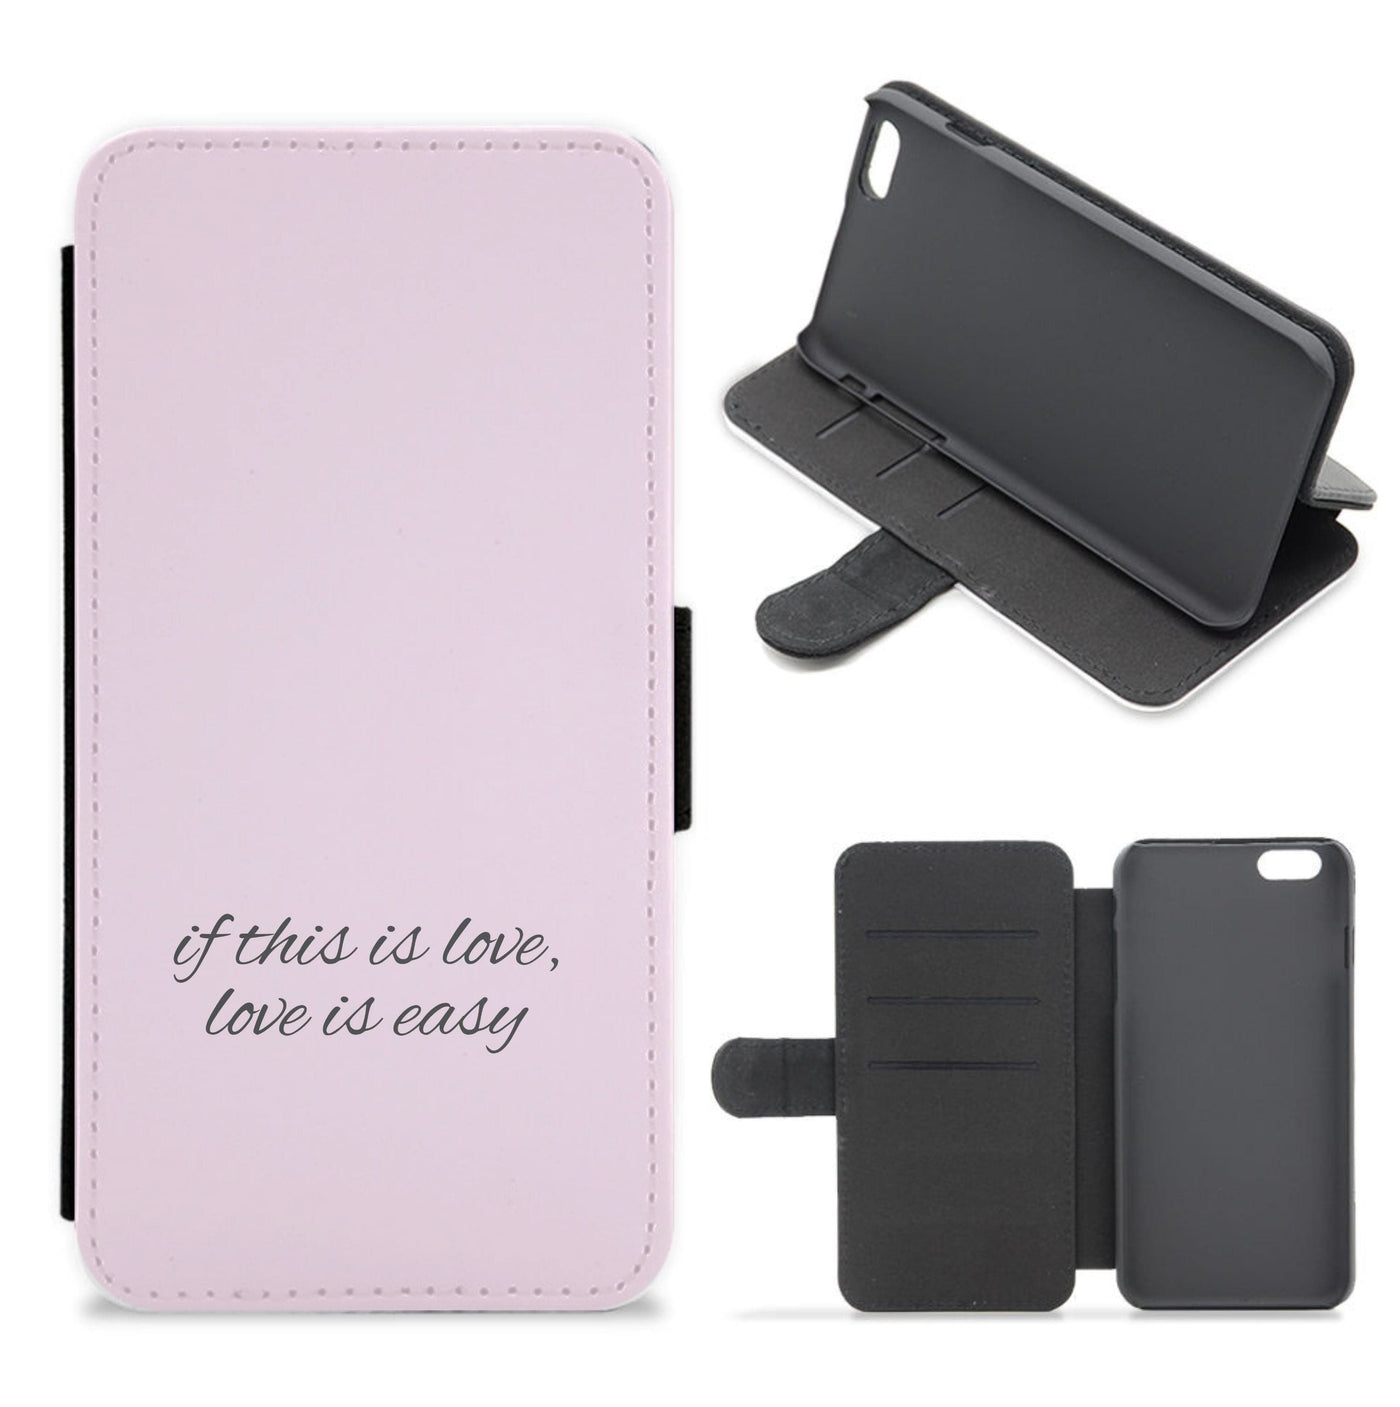 If This Is Love, Love Is Easy - McFly Flip / Wallet Phone Case